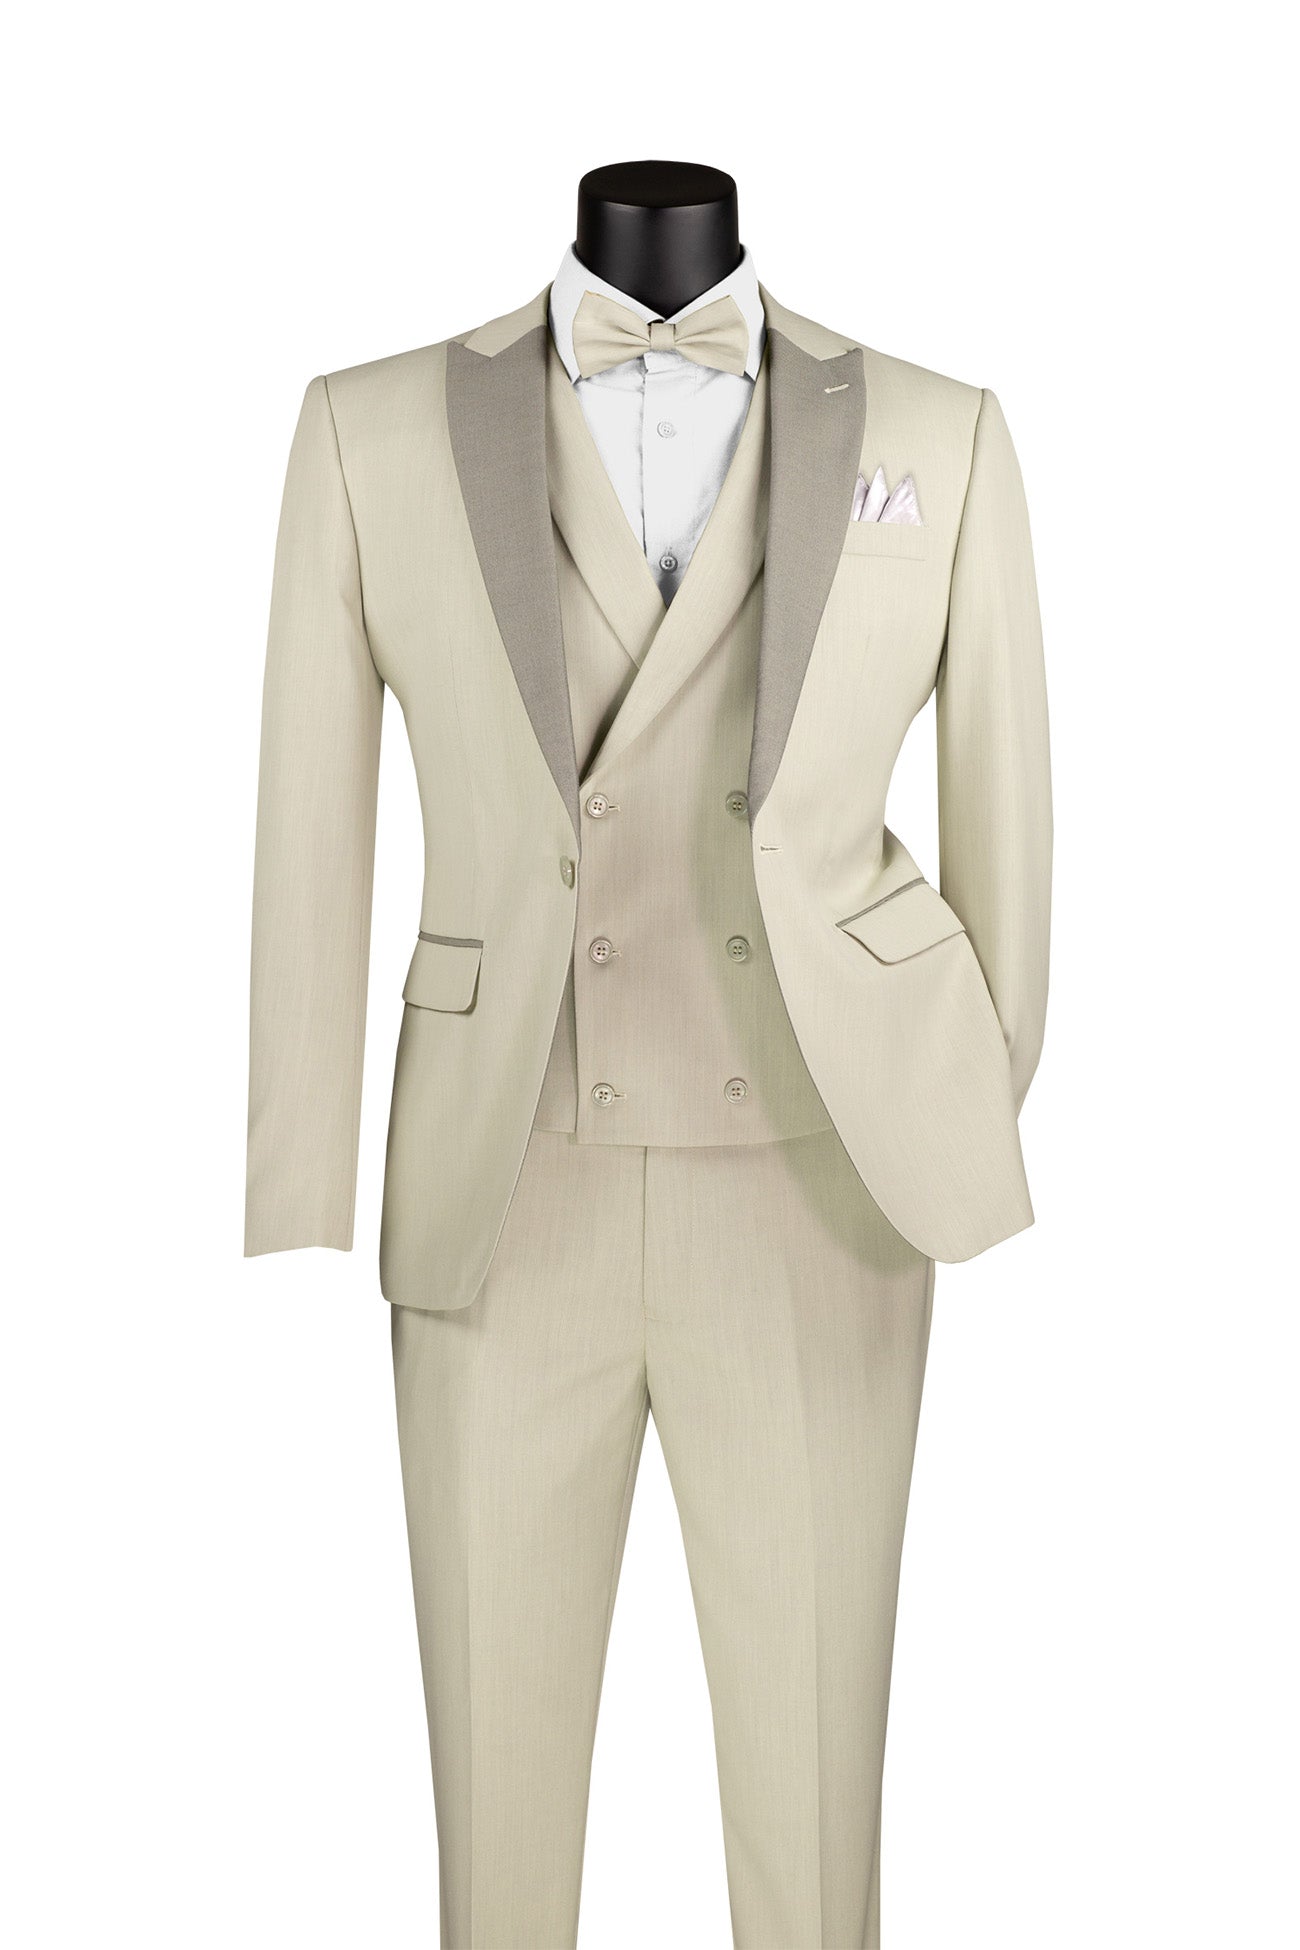 Slim Fit Tuxedo 3 Piece with Matching Bow Tie in Ecru